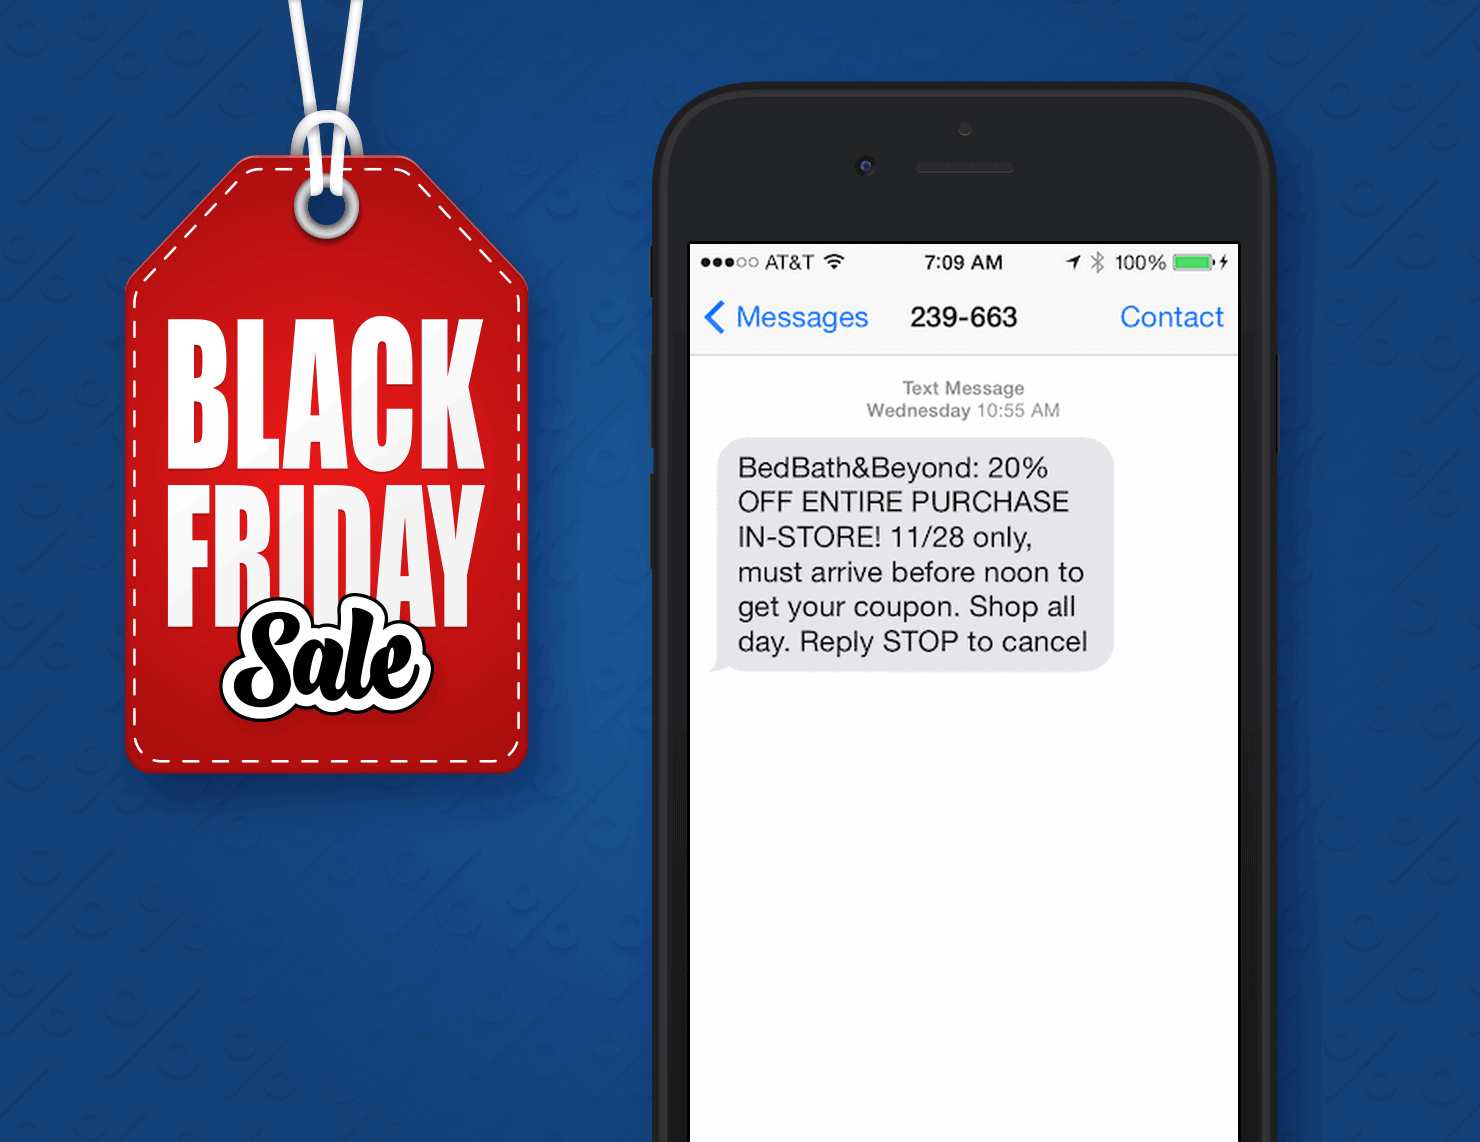 Black Friday SMS Marketing Example From Bed-Bath-Beyond